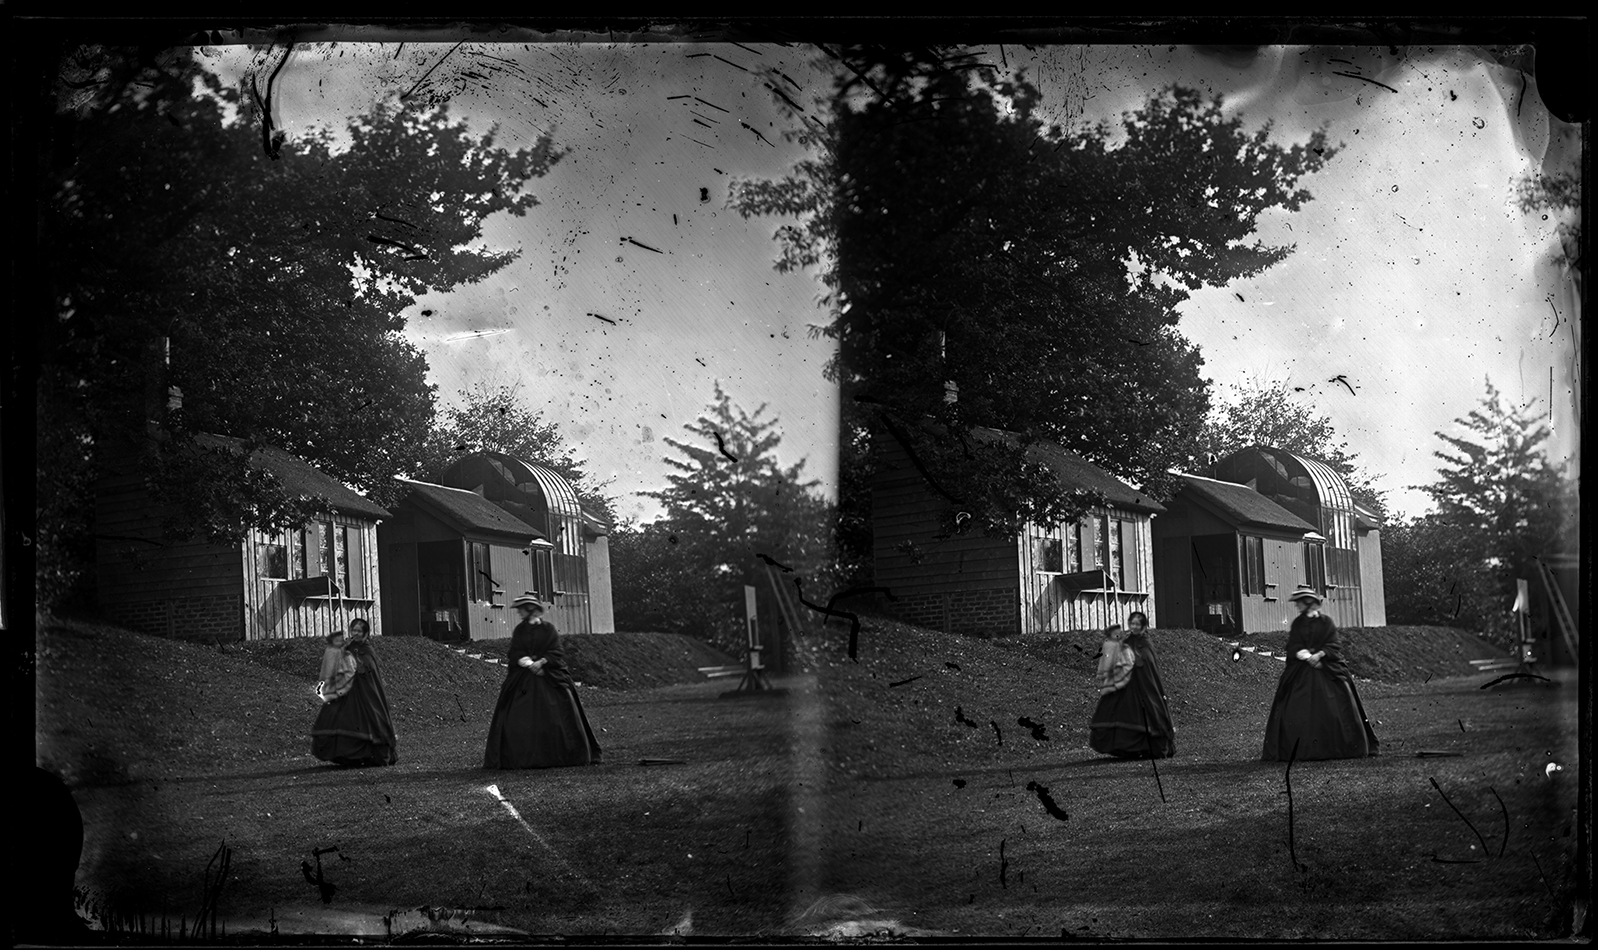 Stereoview of two women, one holding a baby [PHtempCB-A-16]. Unvarnished image shows extensive scratches. As the two women here are both slightly out of focus the photographer likely was not planning on using the image. Happily, the plate was not destroyed as the Rossie Priory darkroom and skylight studio can be seen clearly behind them.